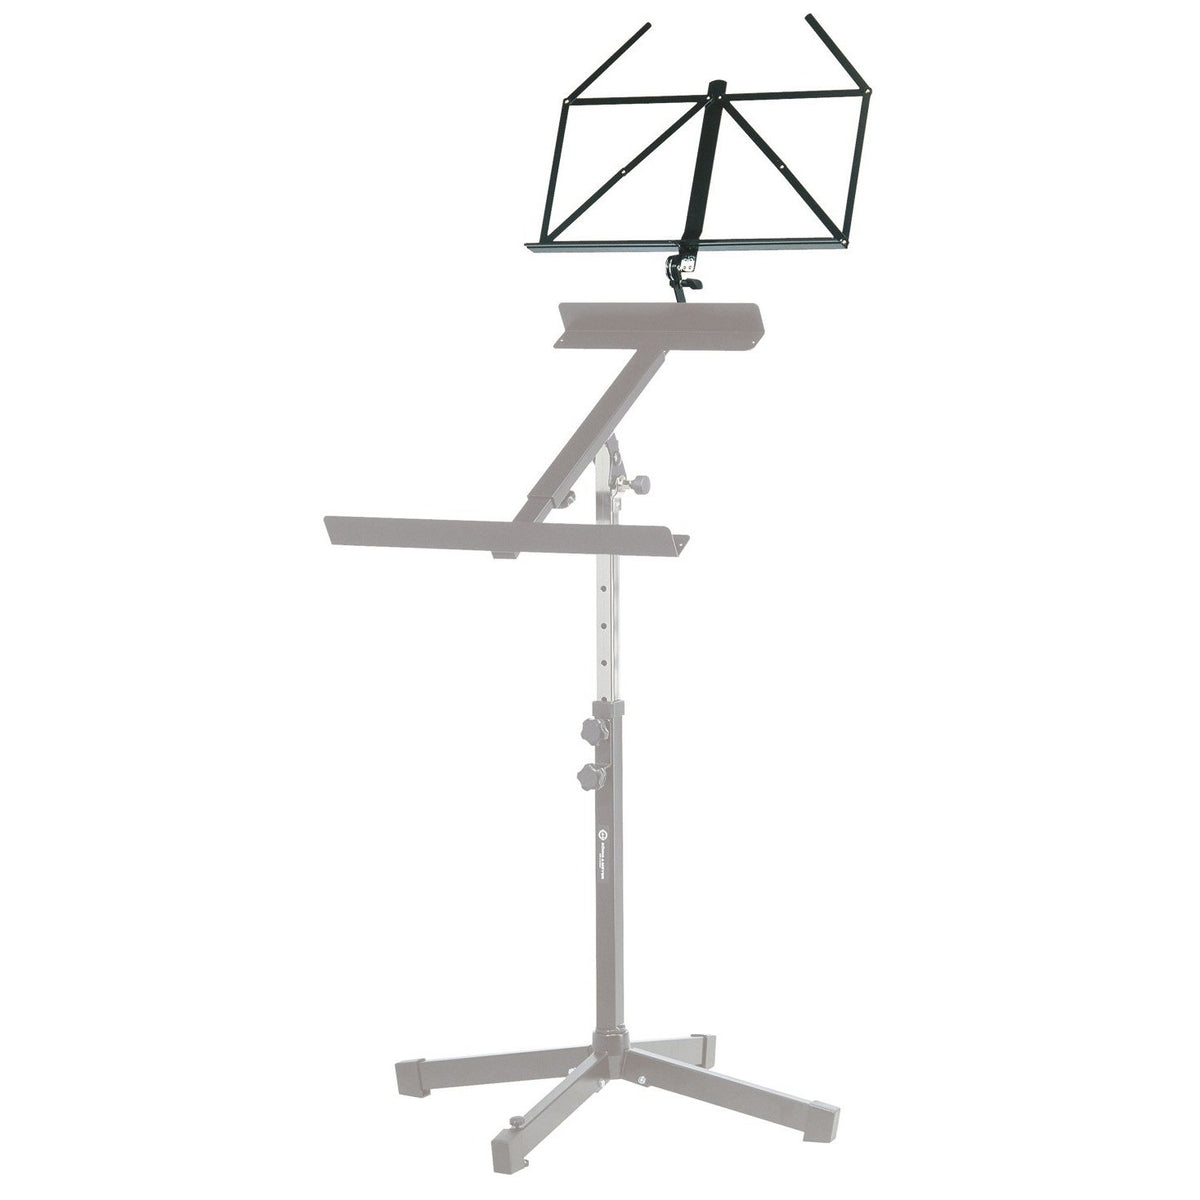 KÃ¶nig &amp; Meyer - 11515 Music Stand (Attaches to Hackbrett Stand 28070)-Instrument Stand-KÃ¶nig &amp; Meyer-Music Elements